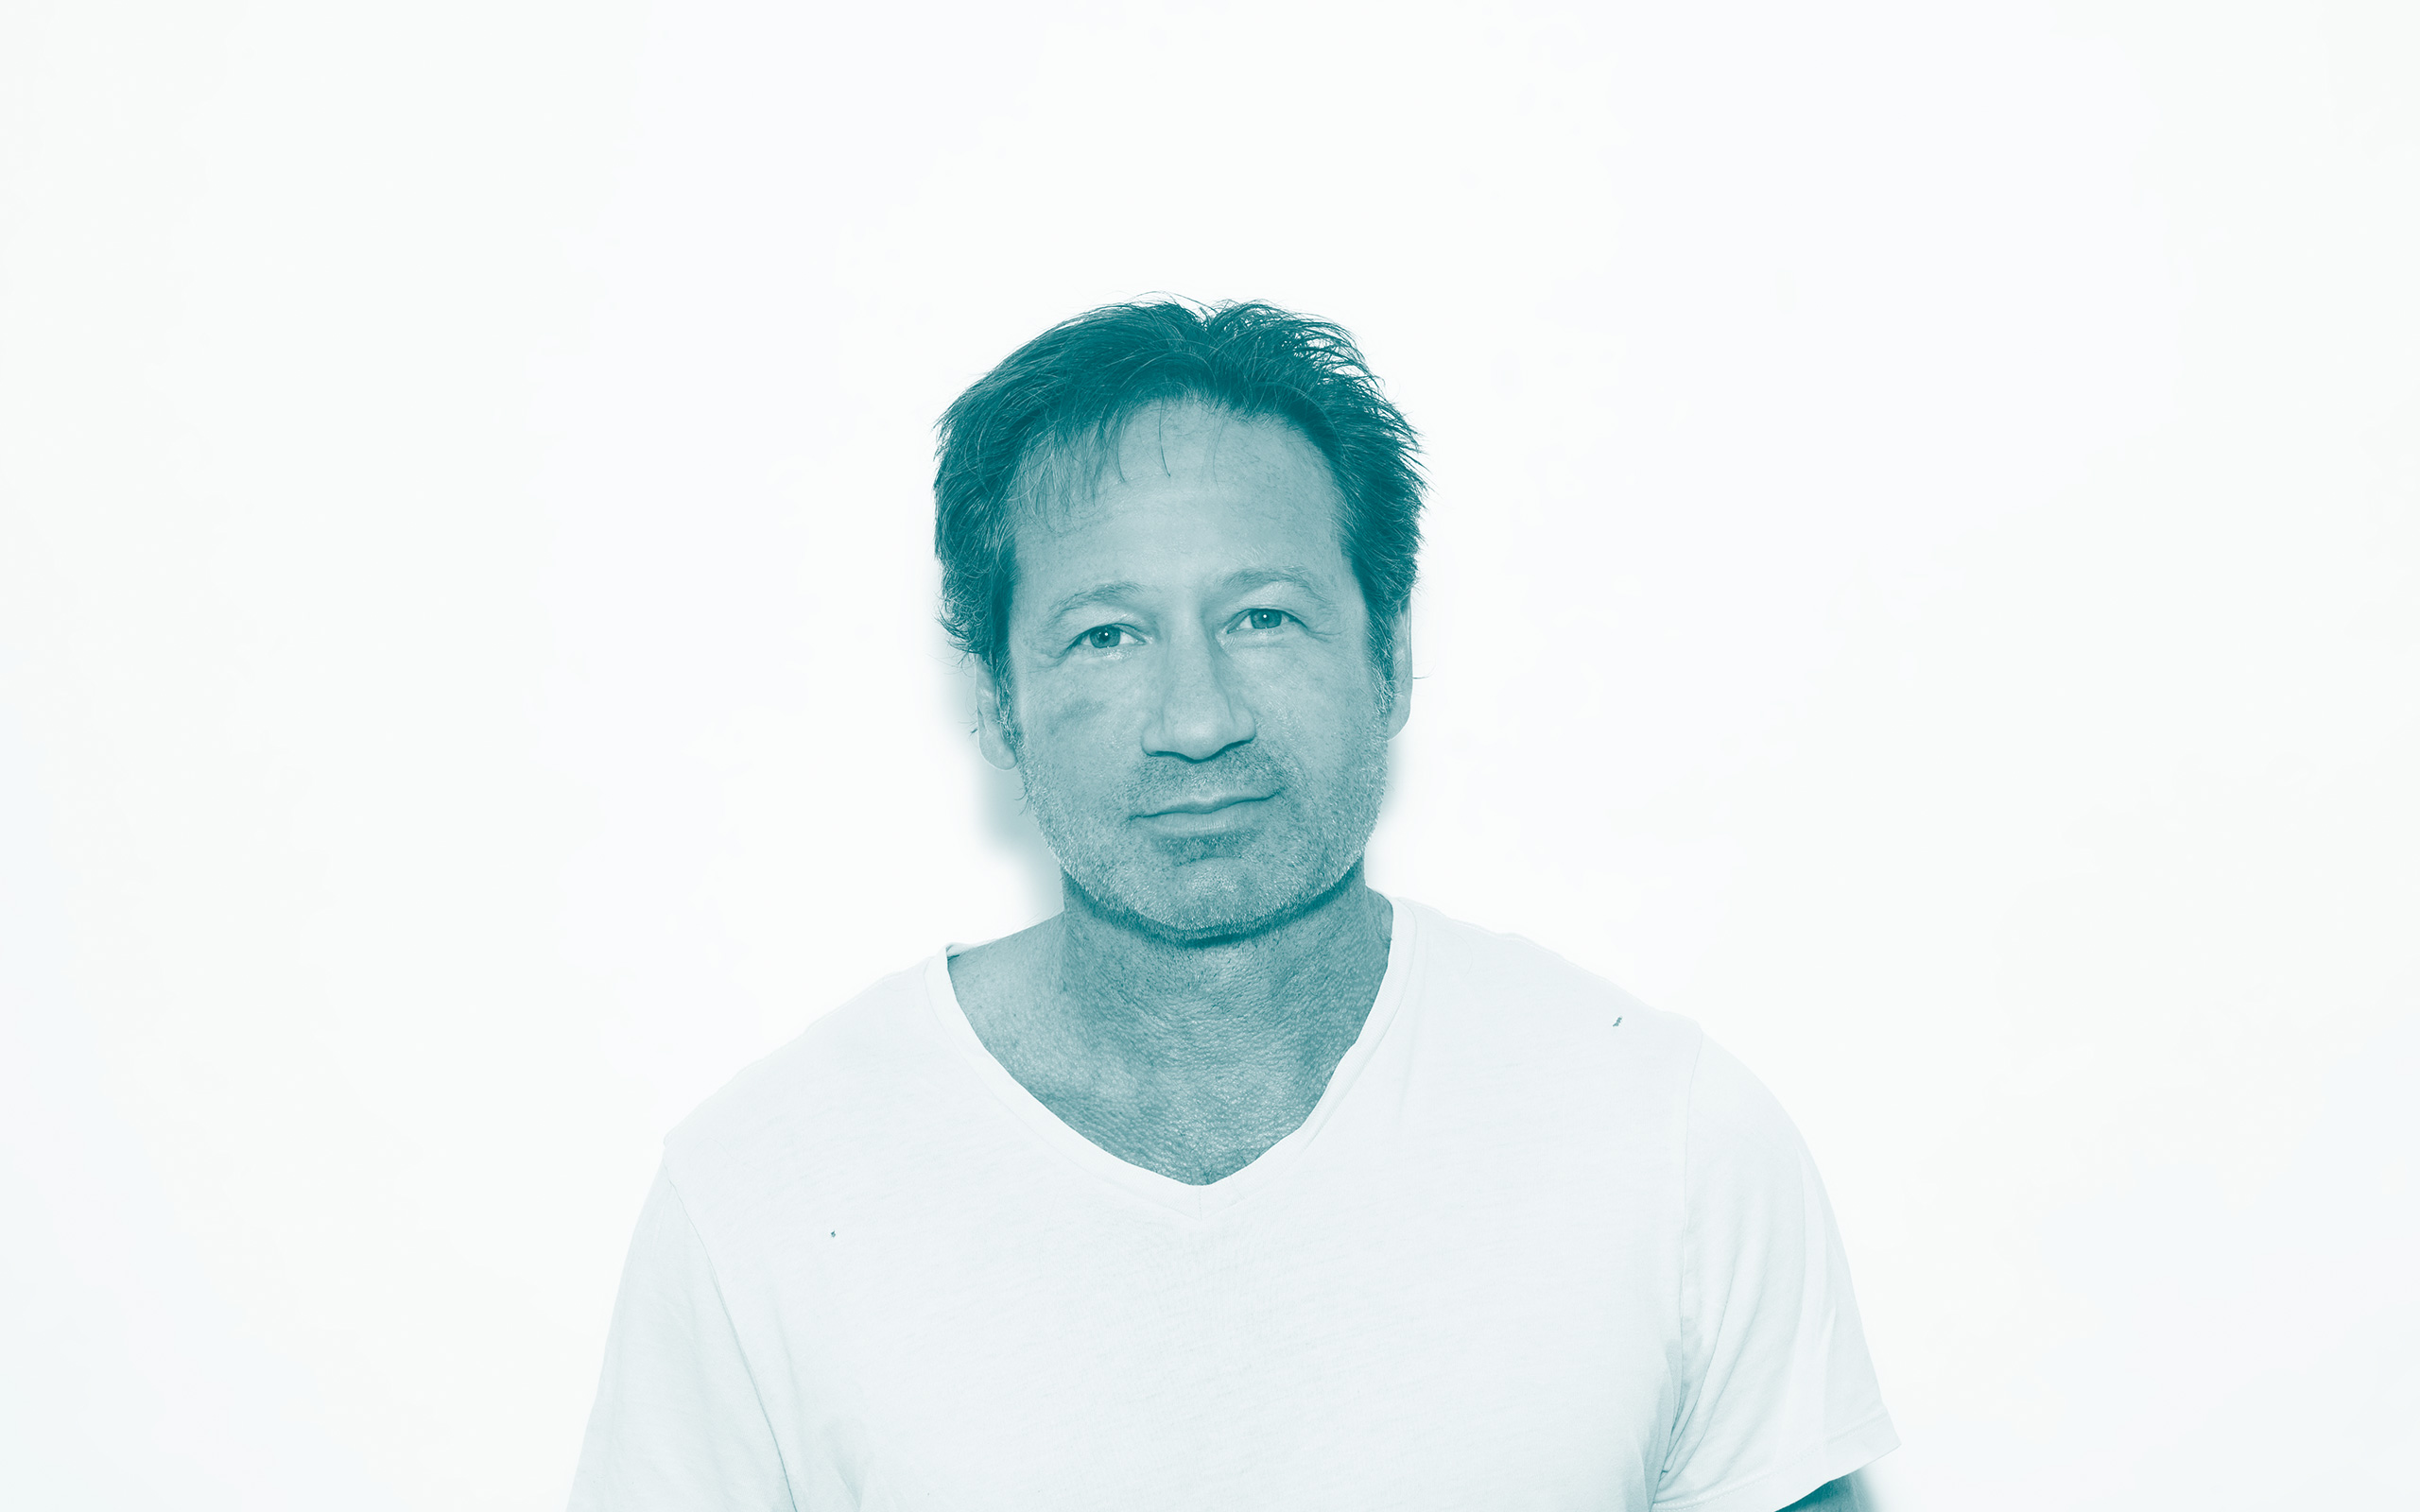 David Duchovny On The Climate Crisis The Drawbacks Of Technology Images, Photos, Reviews